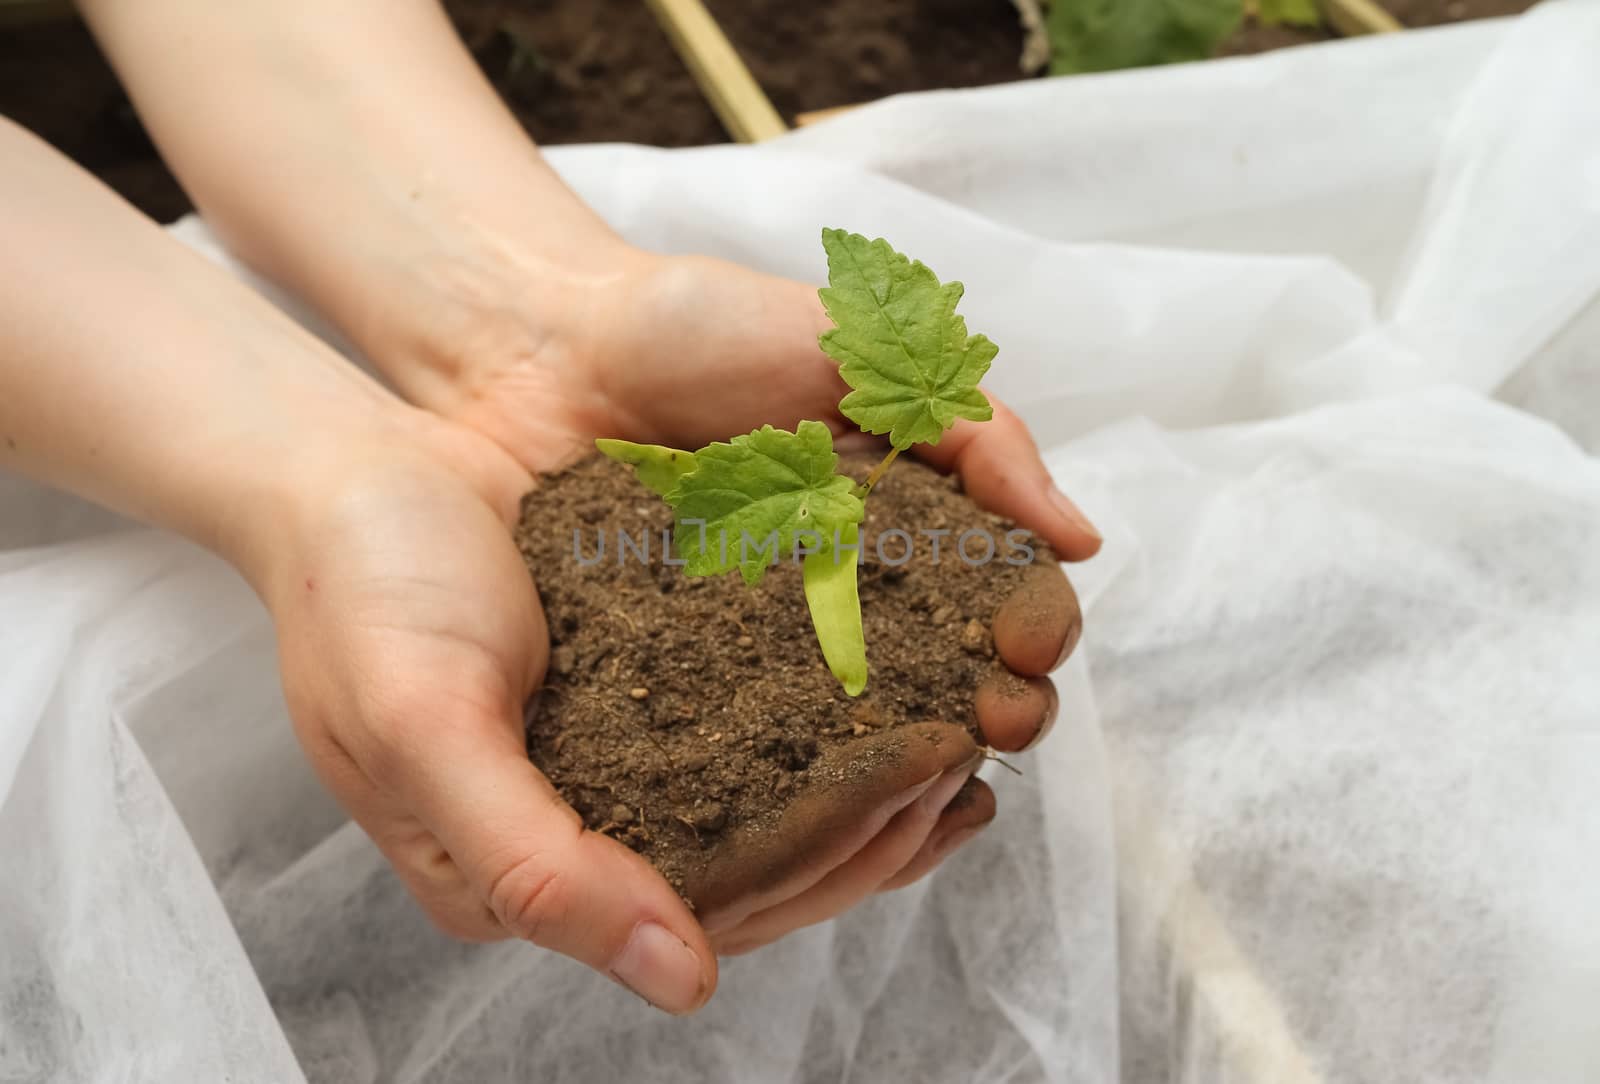 Human hands of a young woman holding green small plant seedling. New life concept.